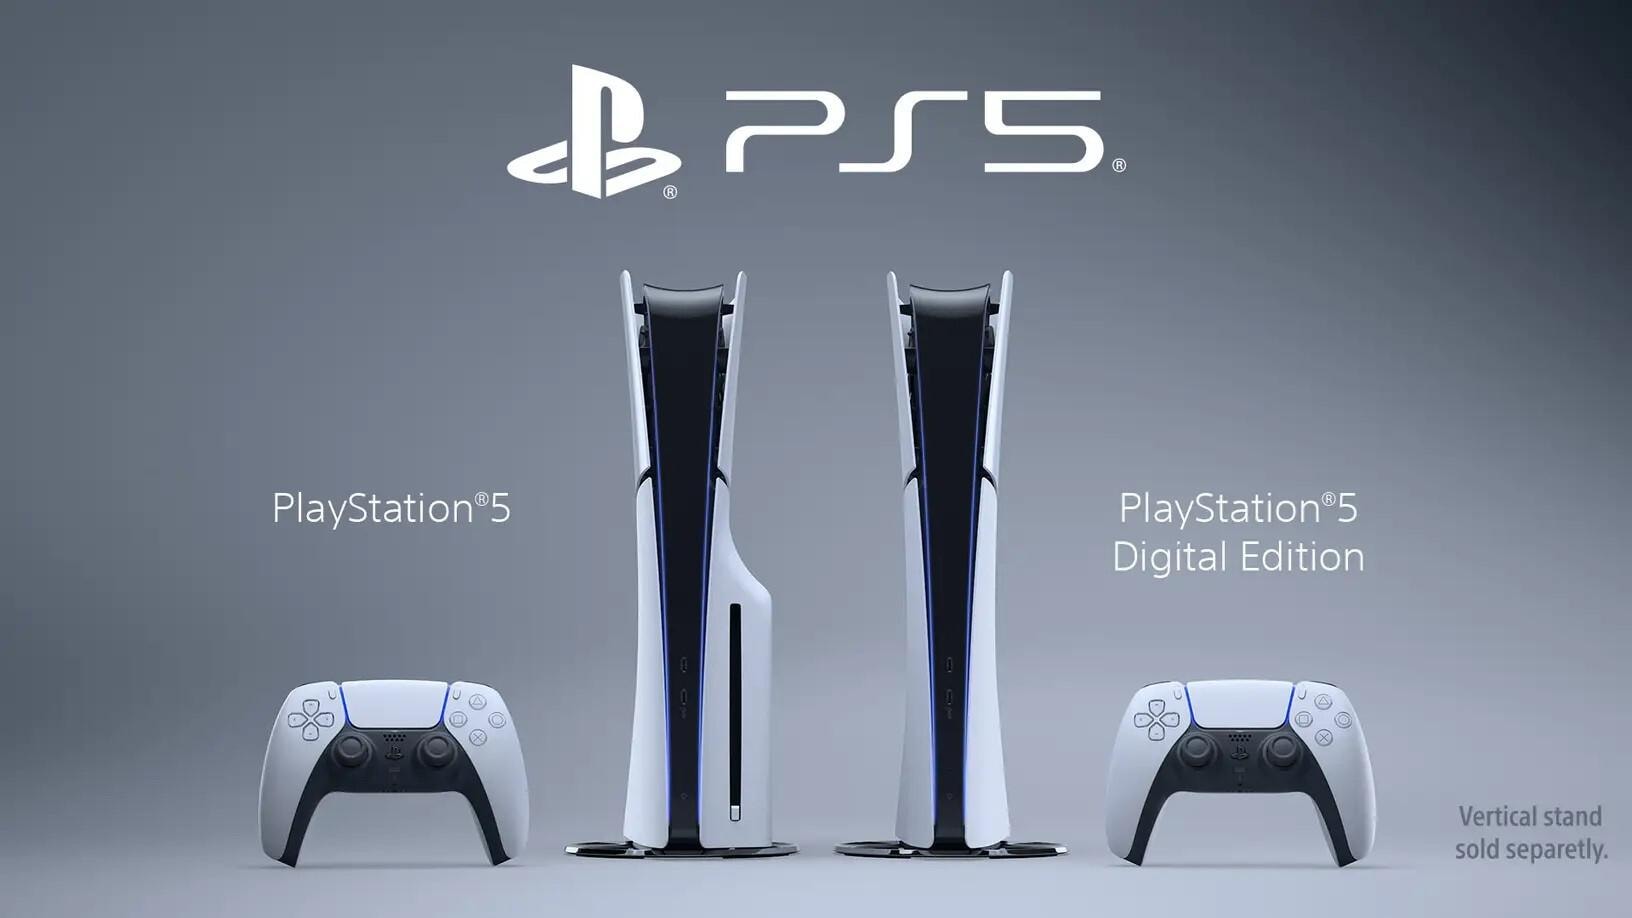 new-slim-playstation-5-models-announced-all-digital-sees-50-price-increase